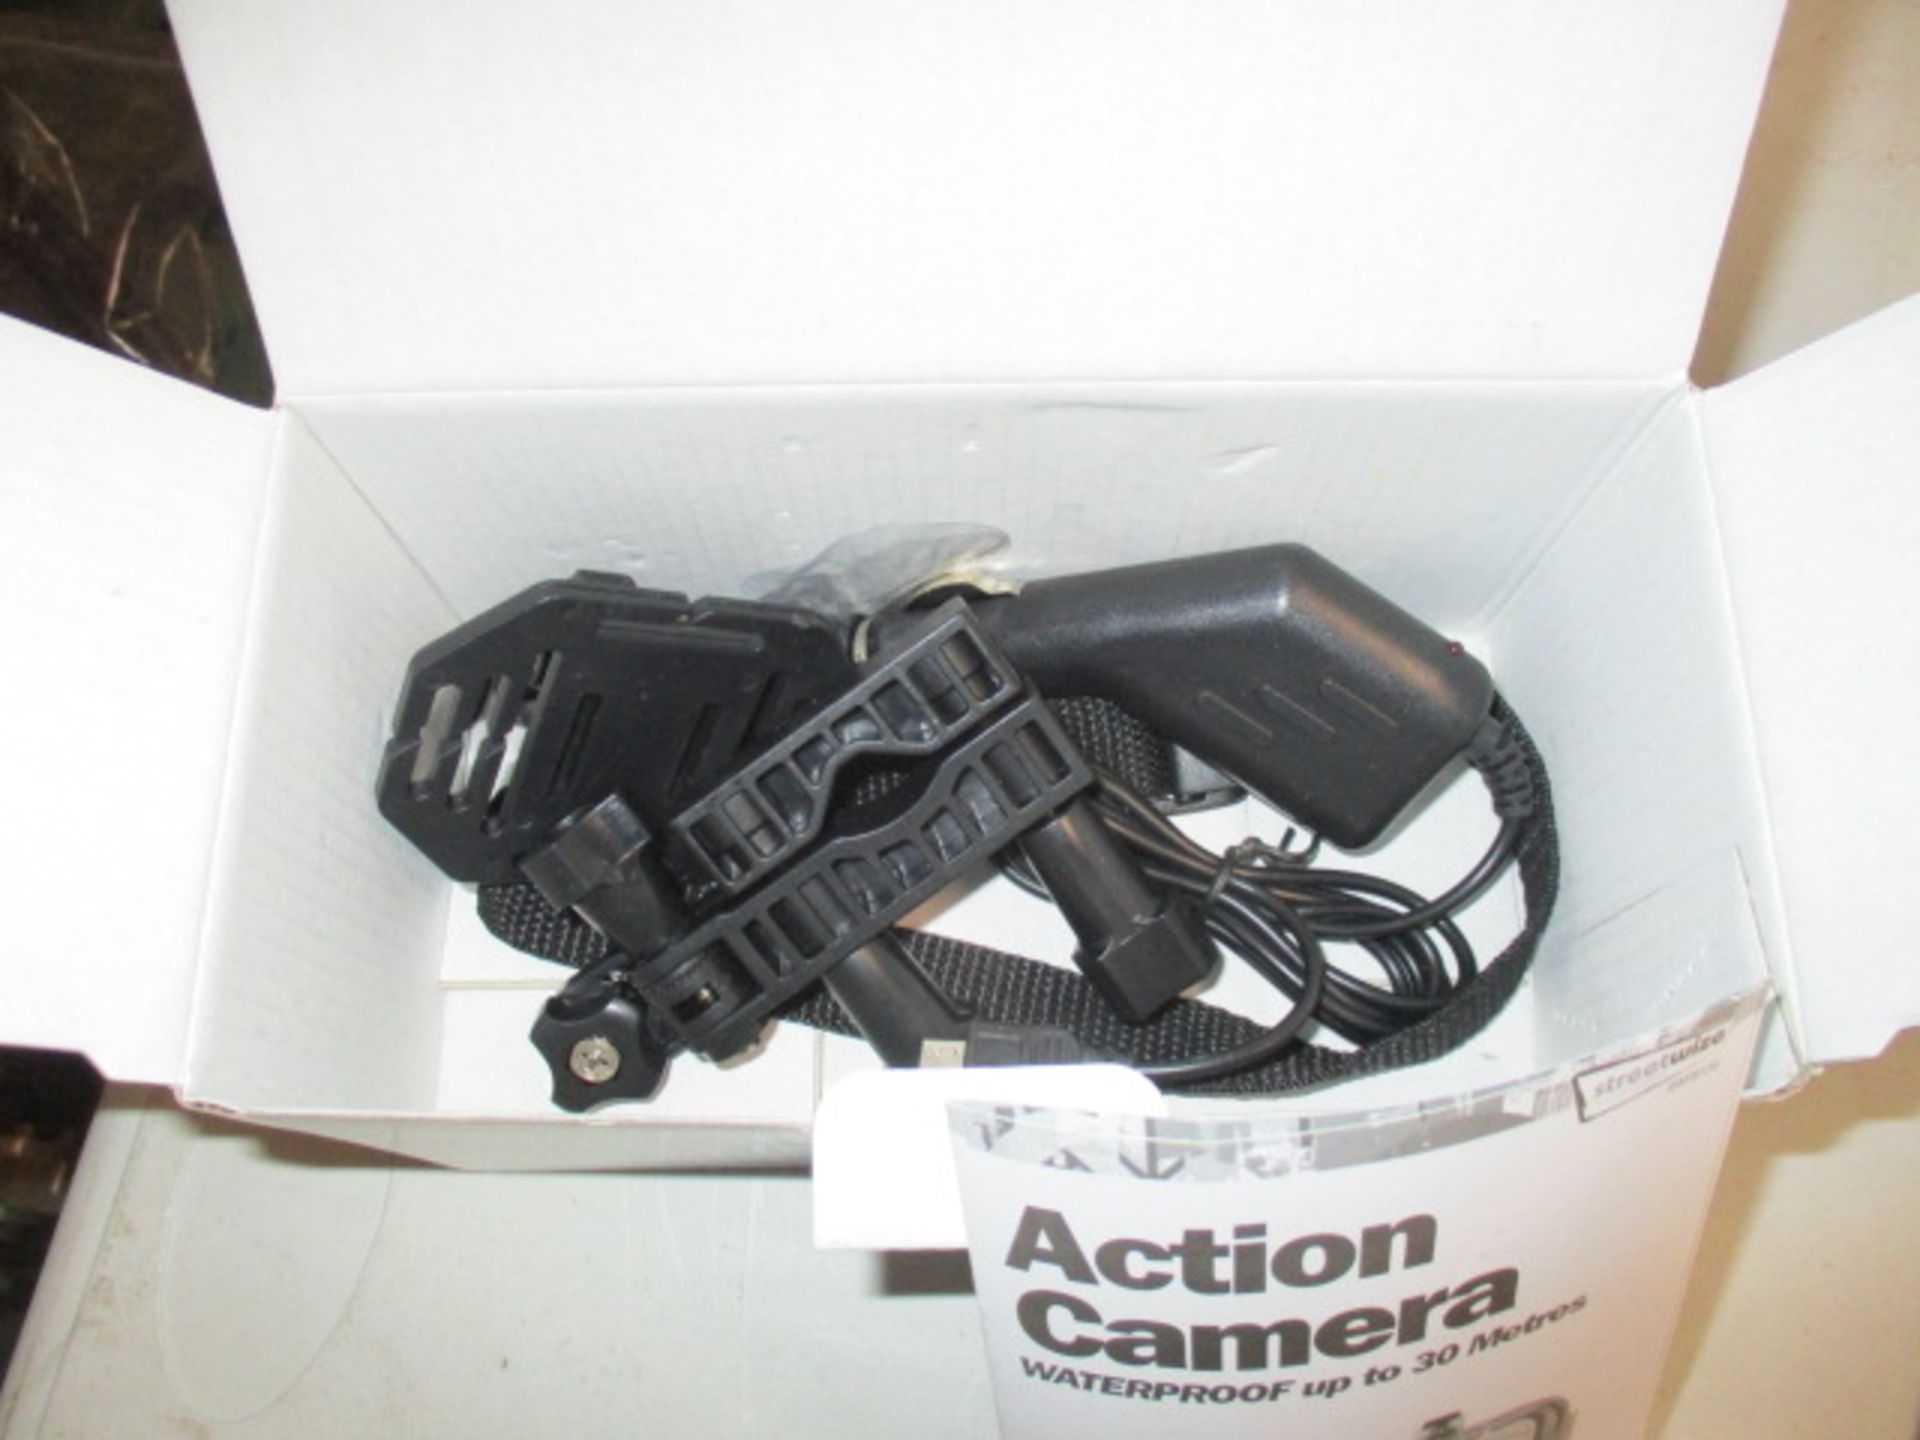 Streetwize waterproof Action Camera upto 30 metres boxed and complete with accessories looks unused - Image 3 of 3